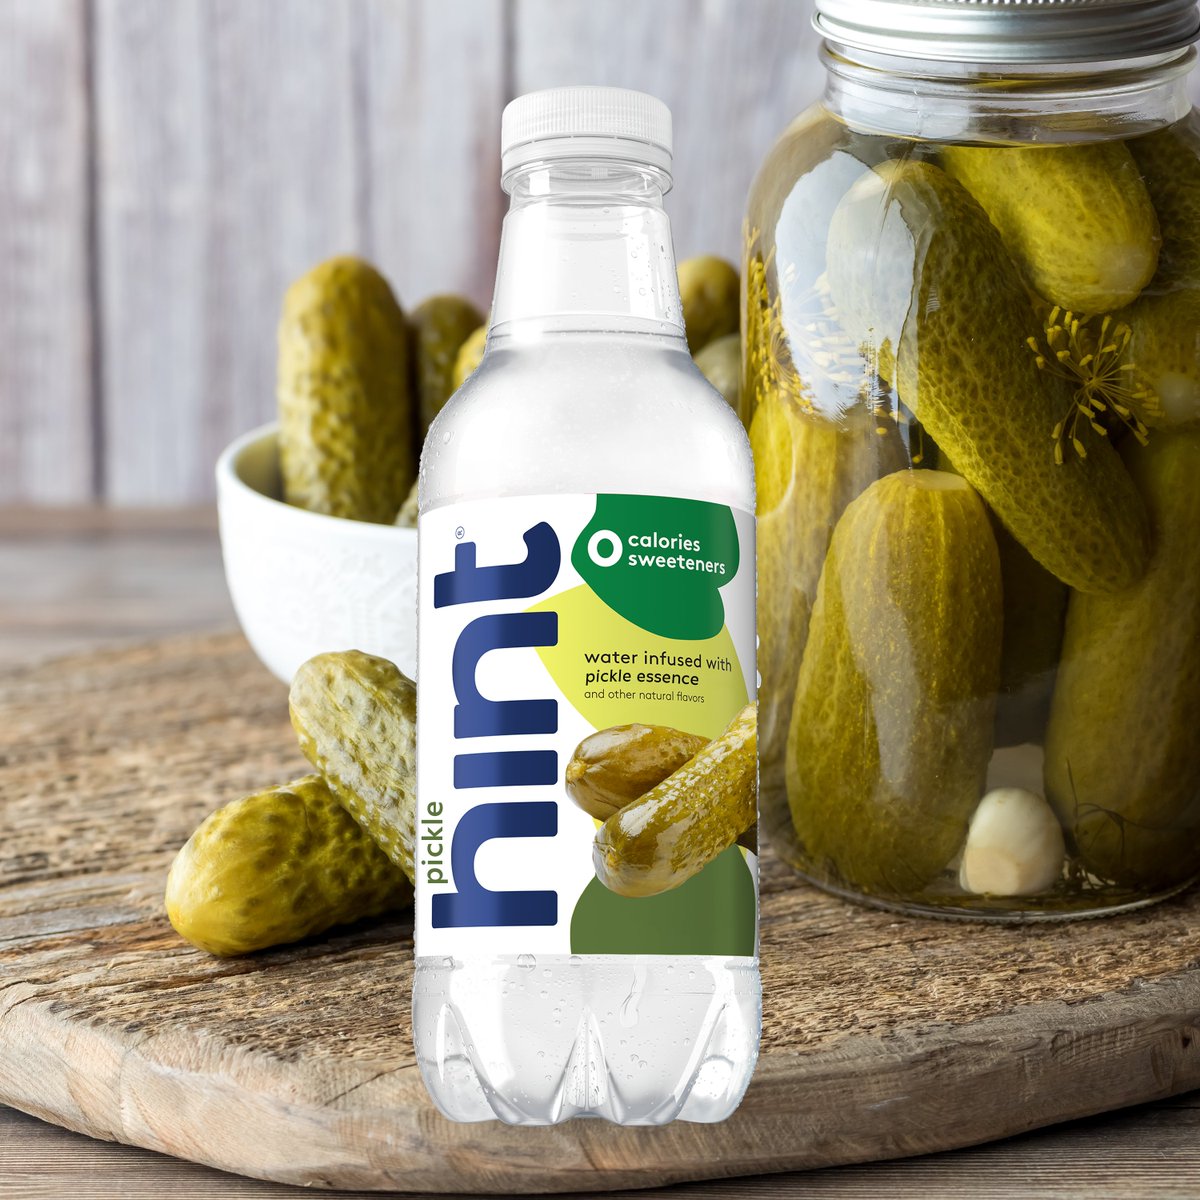 Introducing our newest flavor, Pickle! 🙌 Fans have been begging us for years to make this flavor and we're thrilled to say we've FINALLY found the perfect combo of dill, sour, gherkin & water. Don't wait! This flavor won't stick around past April 1st. 😉 #HintWater #AprilFools